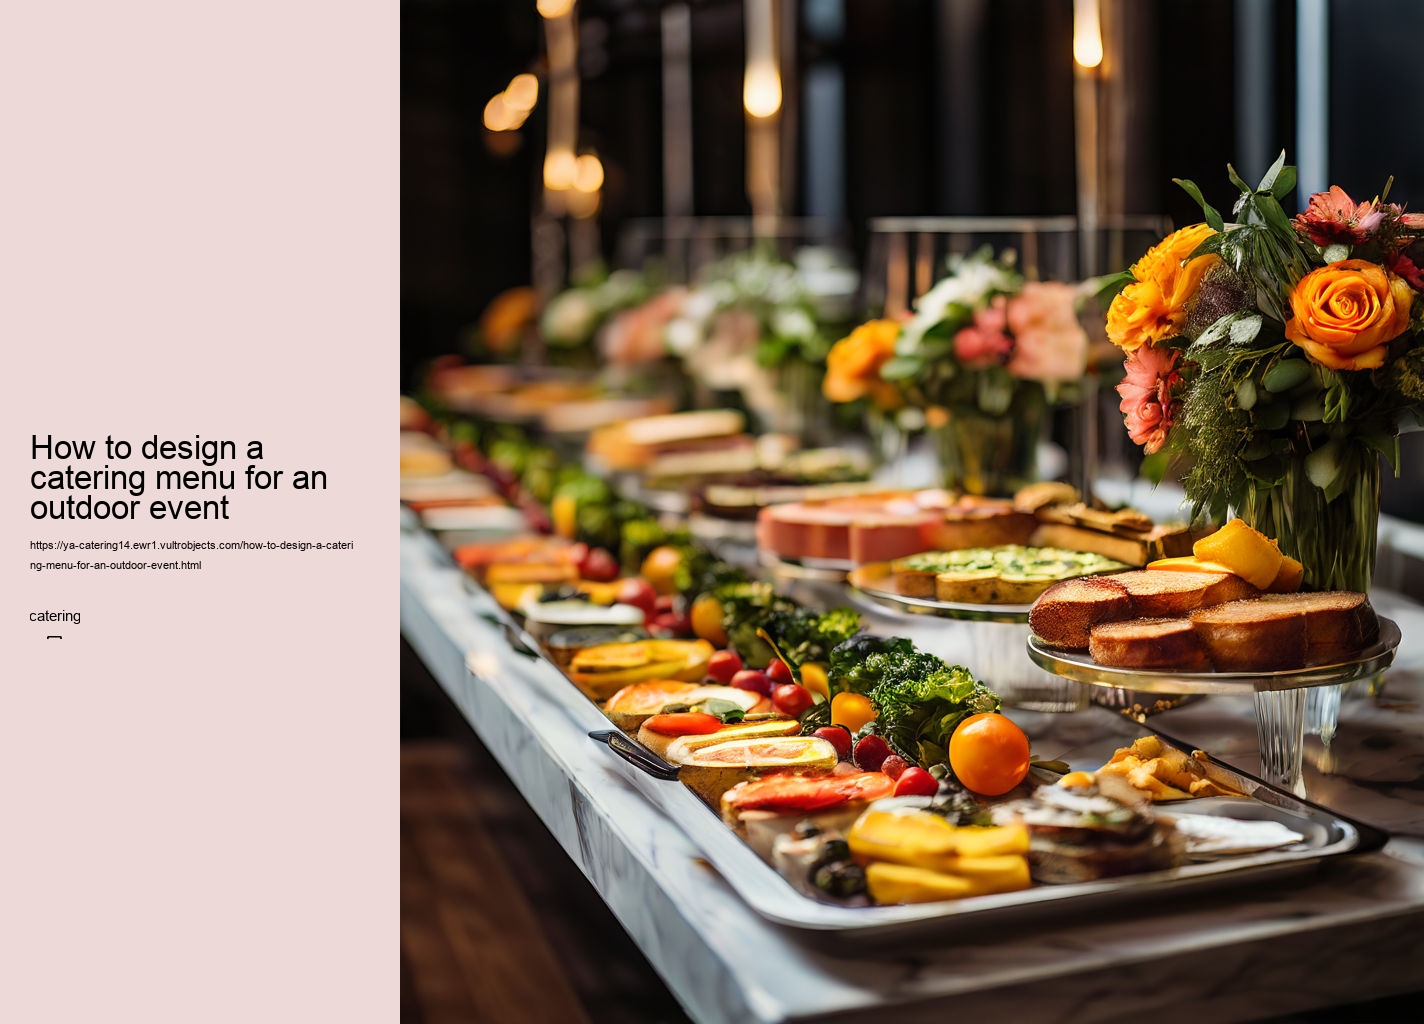 How to design a catering menu for an outdoor event